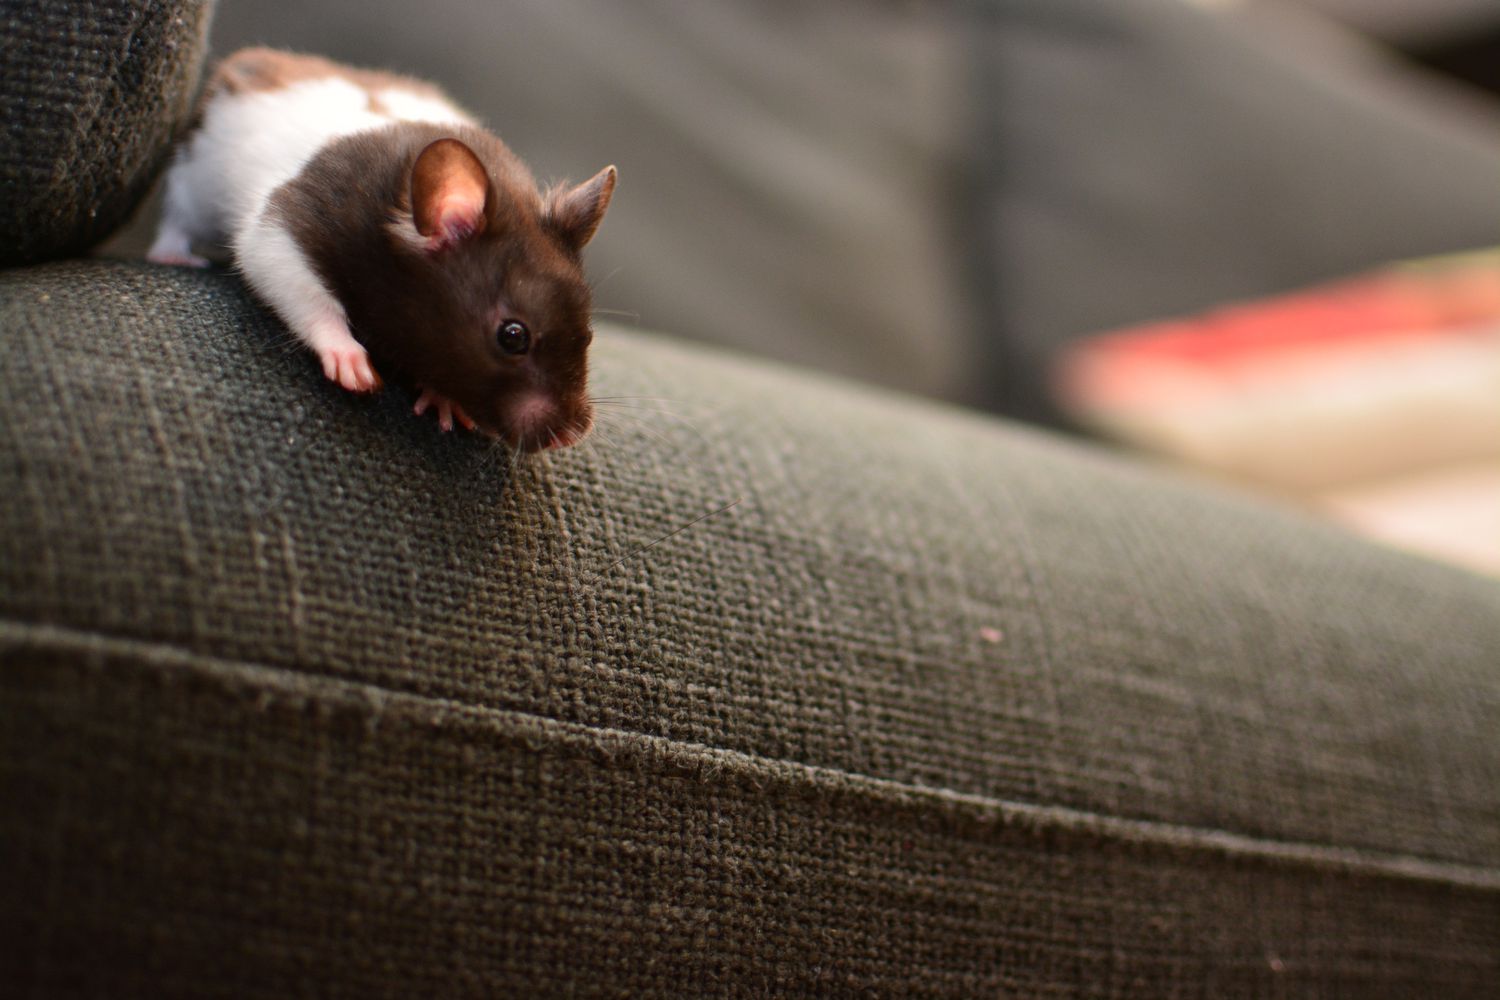 How To Get Rid Of Mice In Sofa